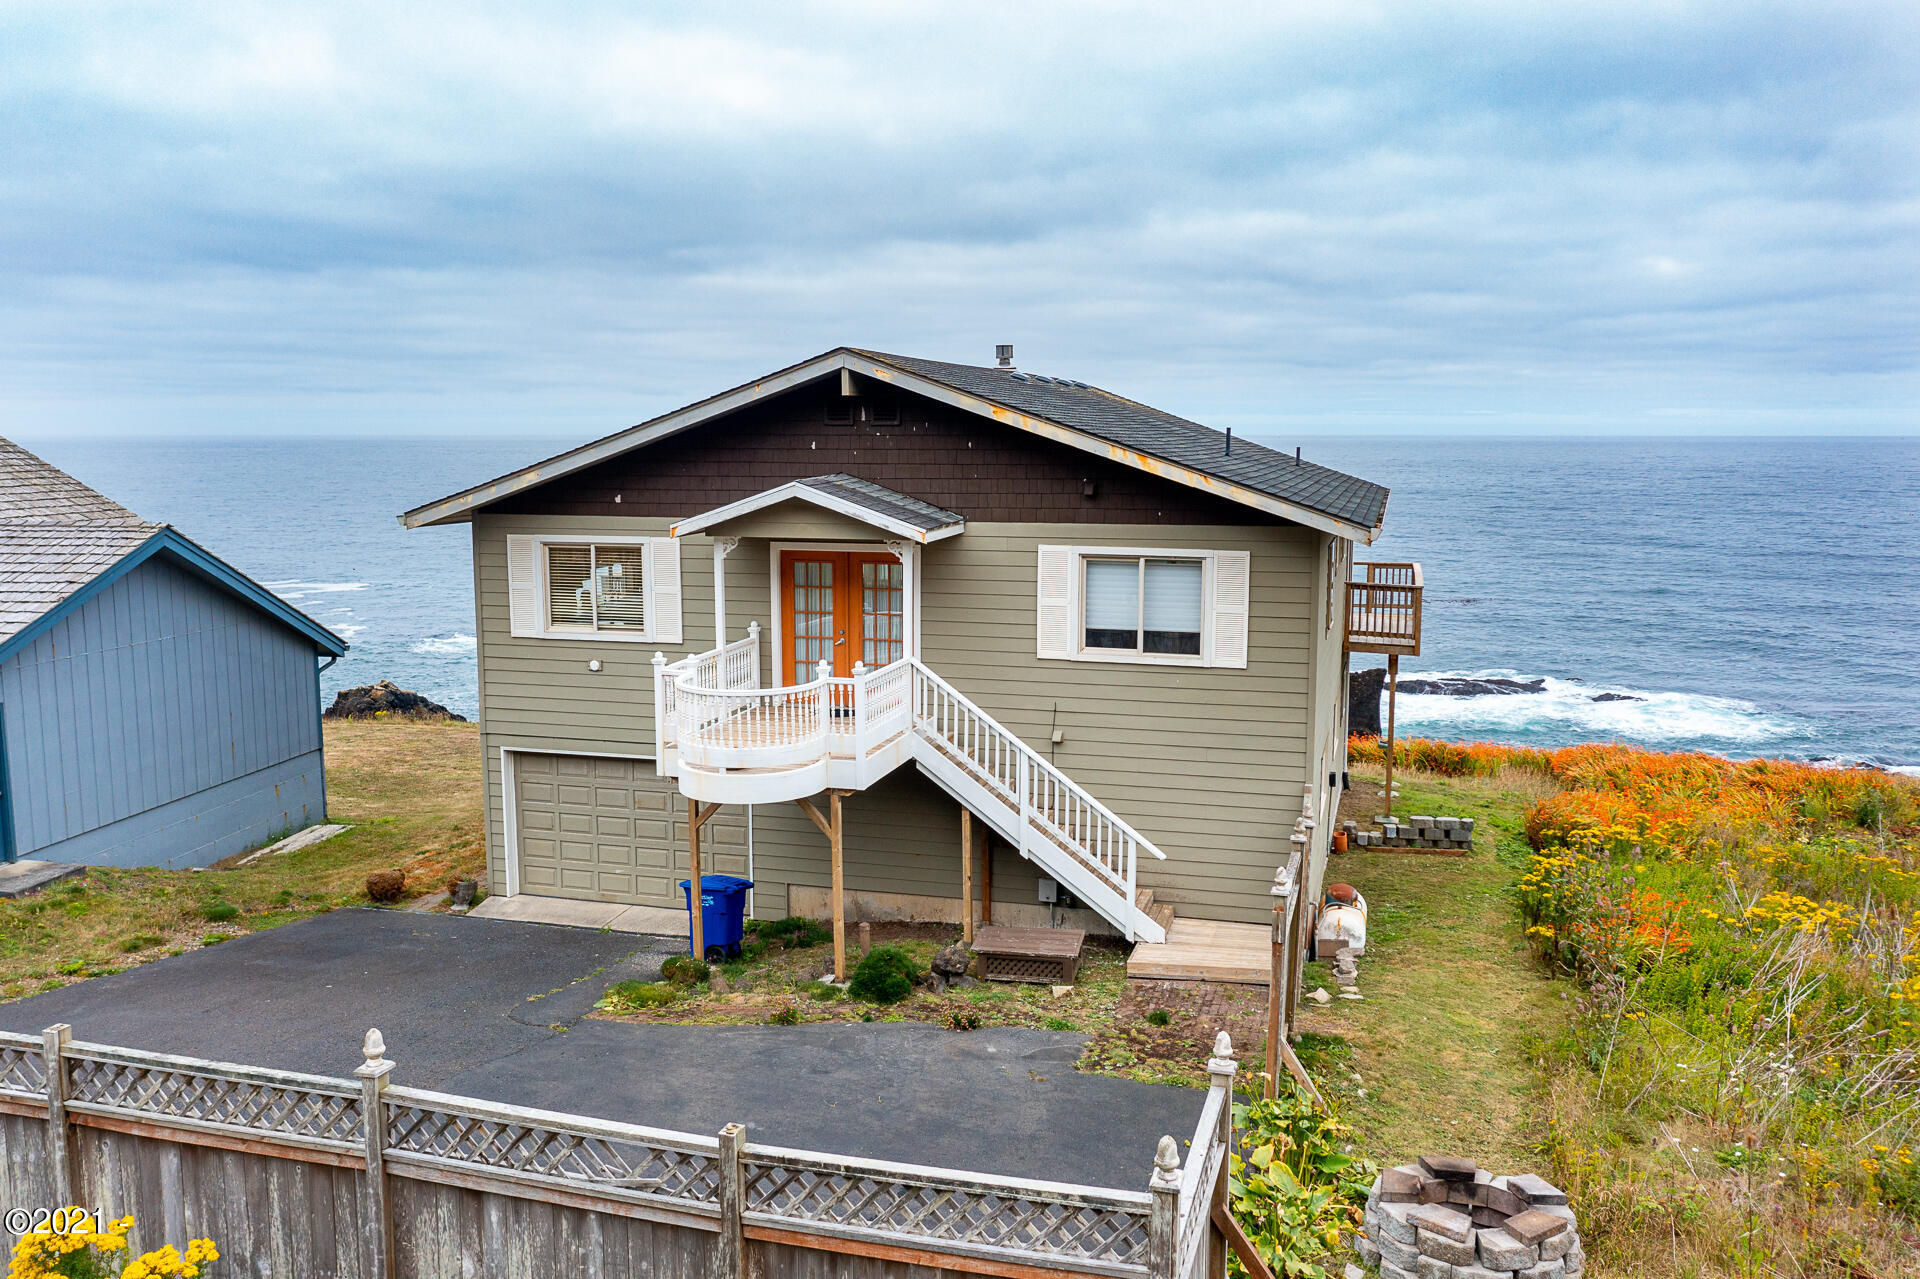 3575 Rocky Creek Depoe Bay, Gleneden Beach, Lincoln City, Newport, Otis, Rose Lodge, Seal Rock, Waldport, Yachats, To Home Listings - Amy Plechaty, Emerald Coast Realty Real Estate, homes for sale, property for sale